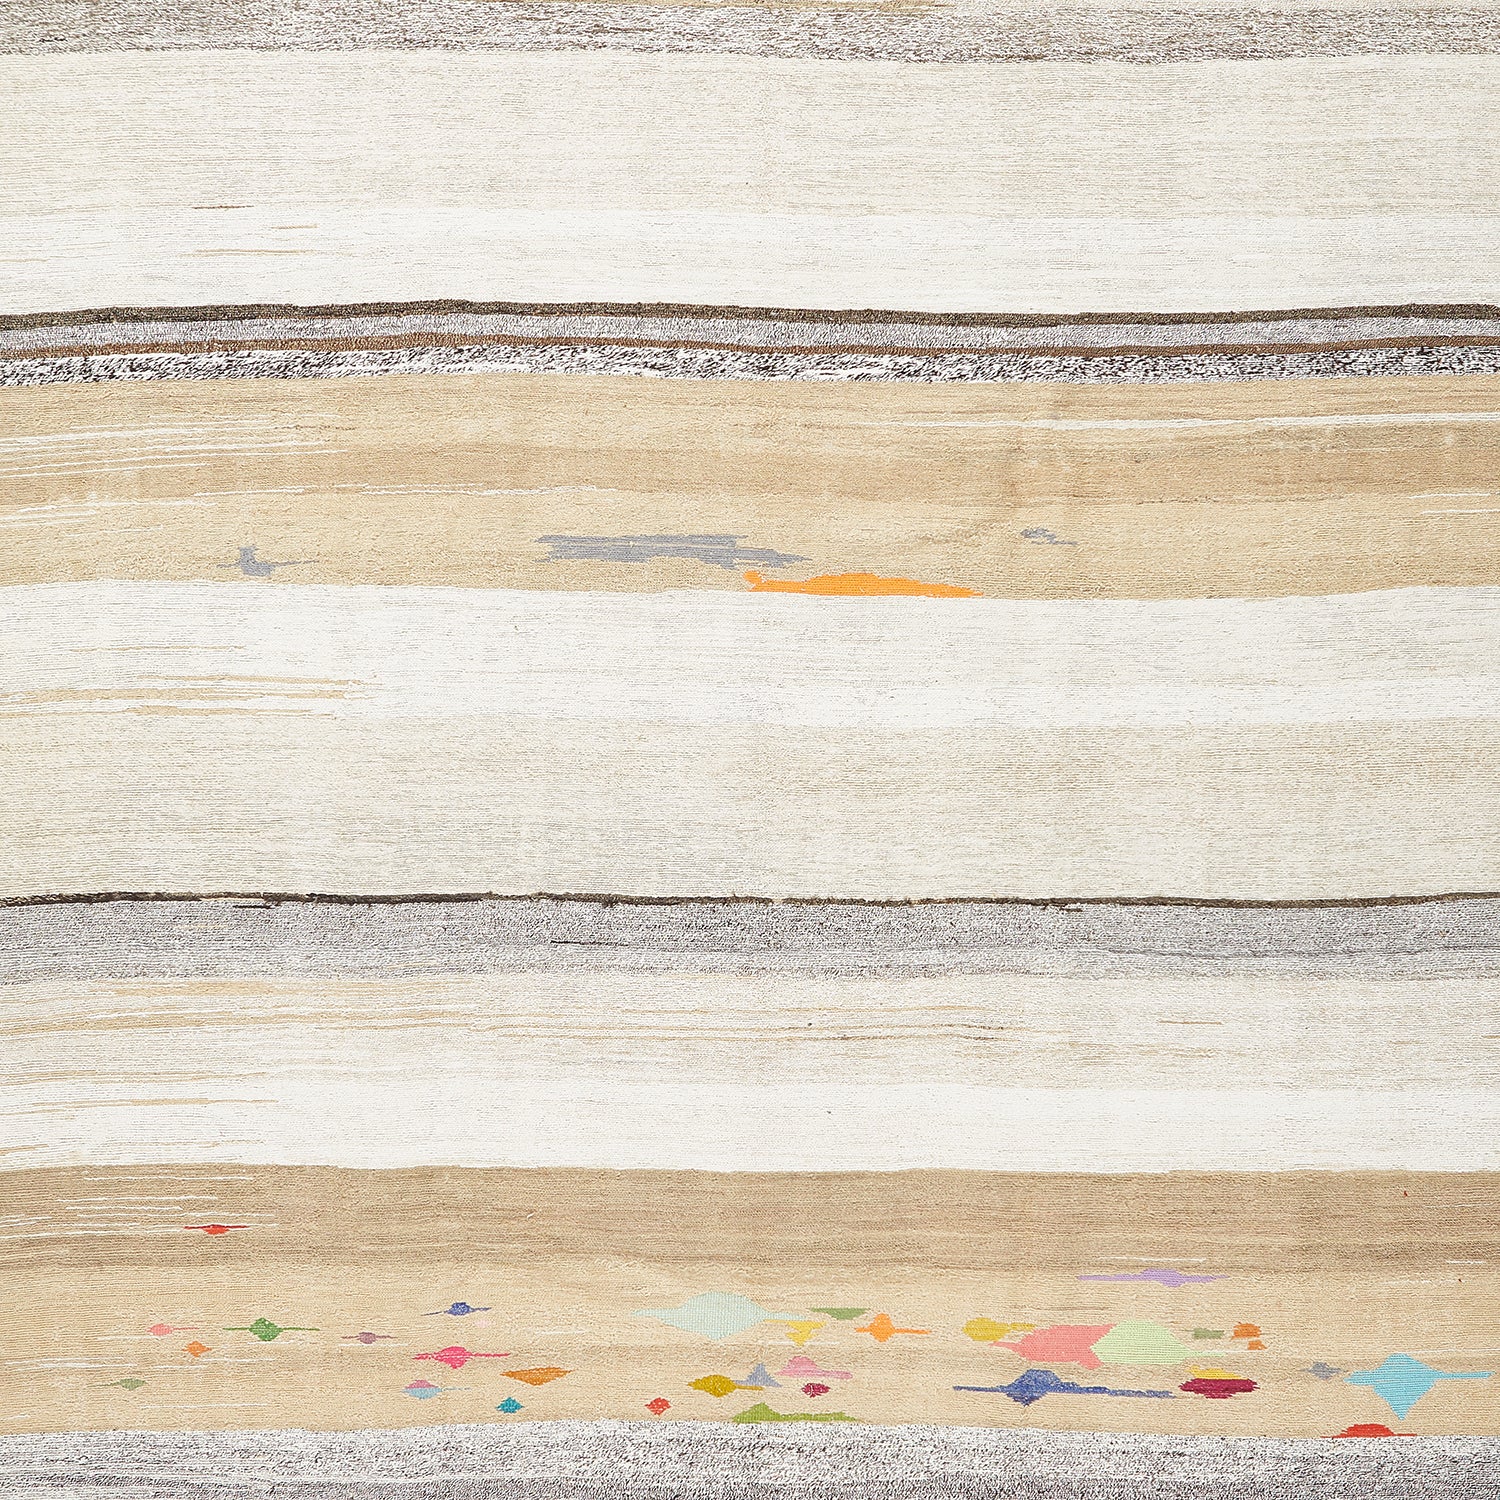 Textured and striped wood-like pattern with rustic, natural aesthetic.